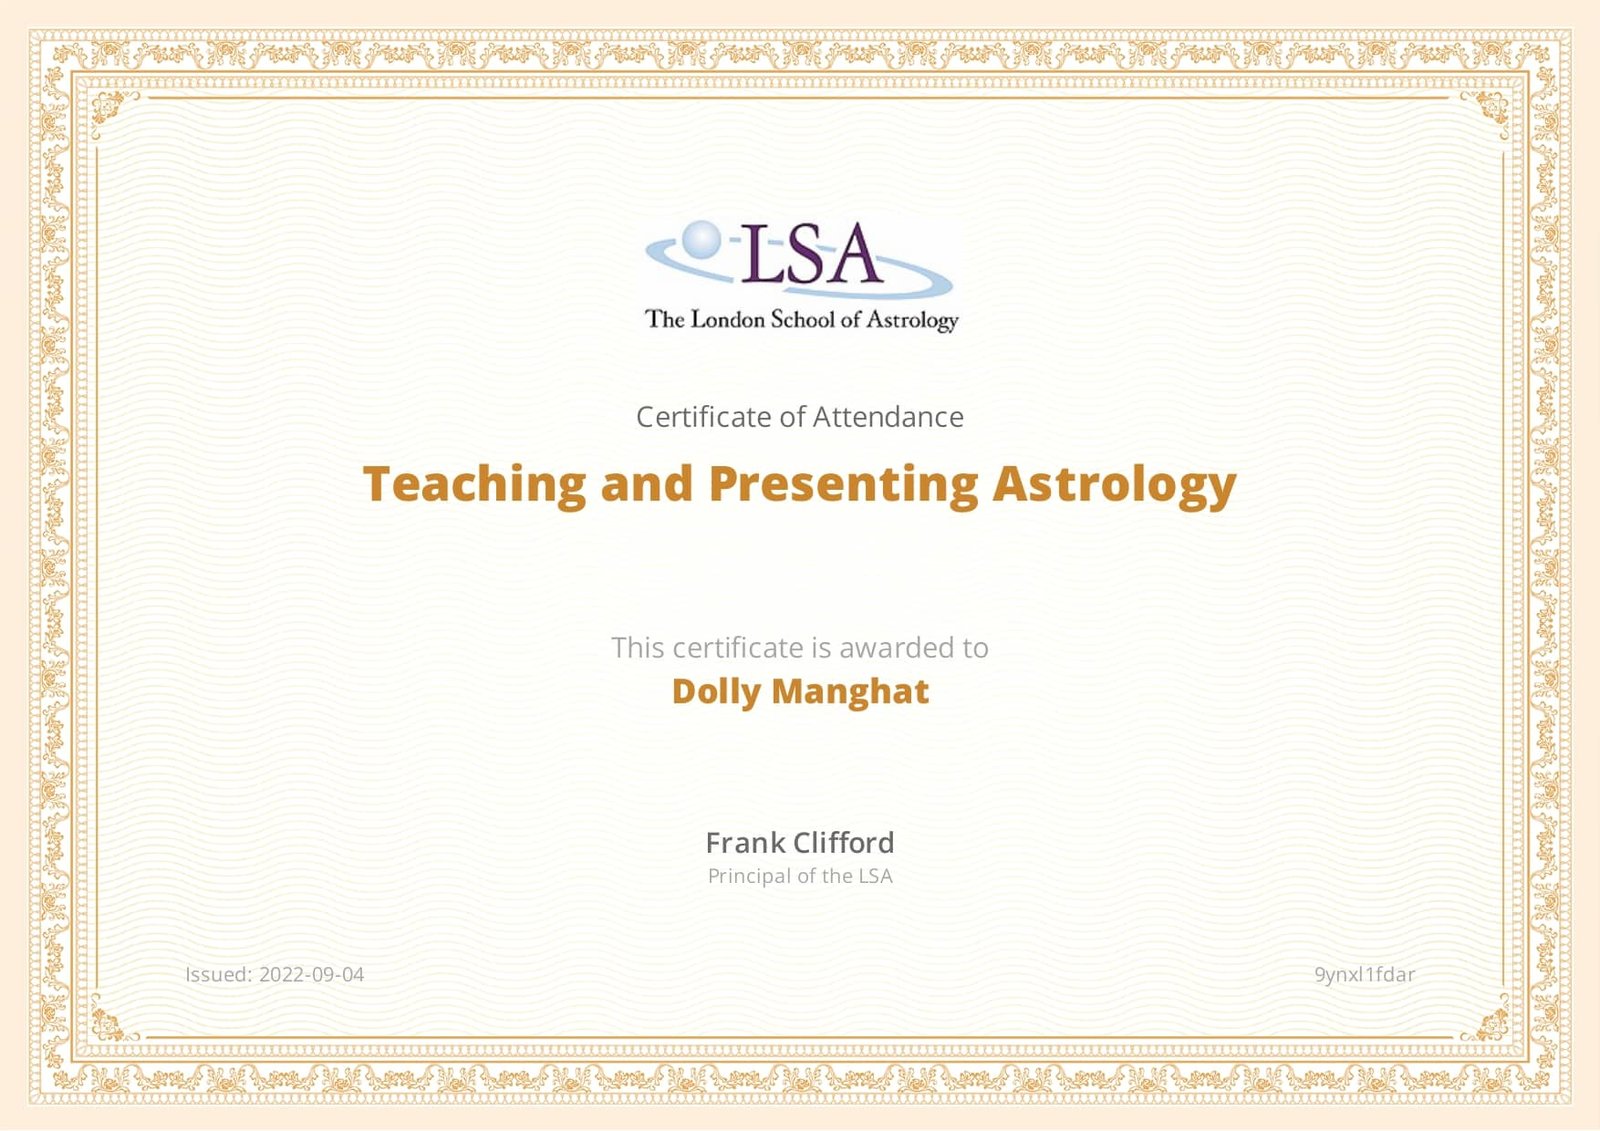 Dolly Manghat Astrology Certificate